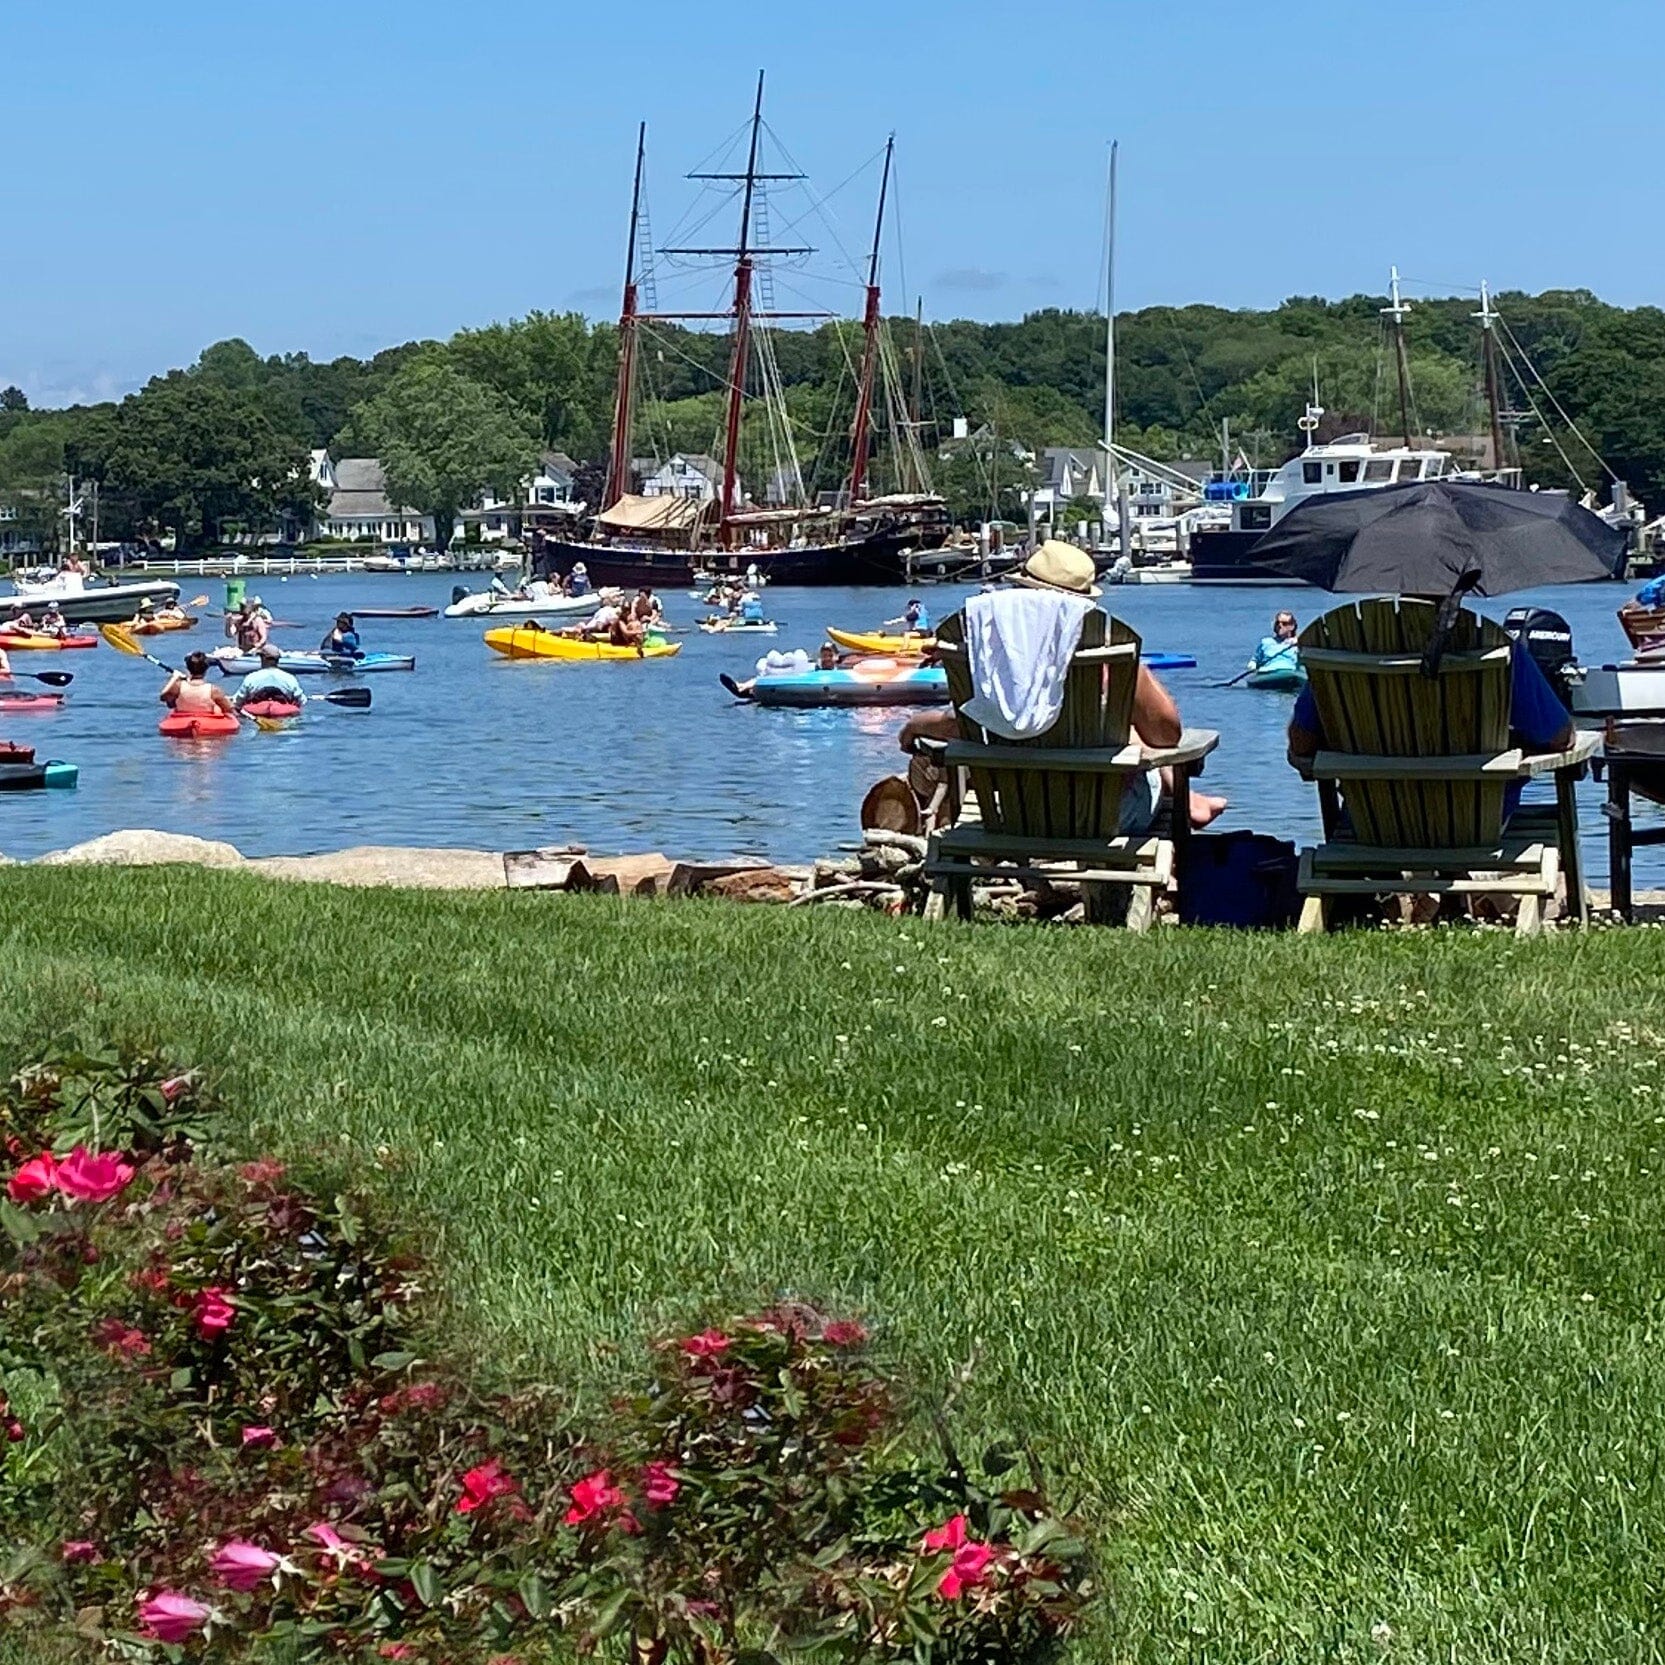 A Great Day For Floatswella in Mystic